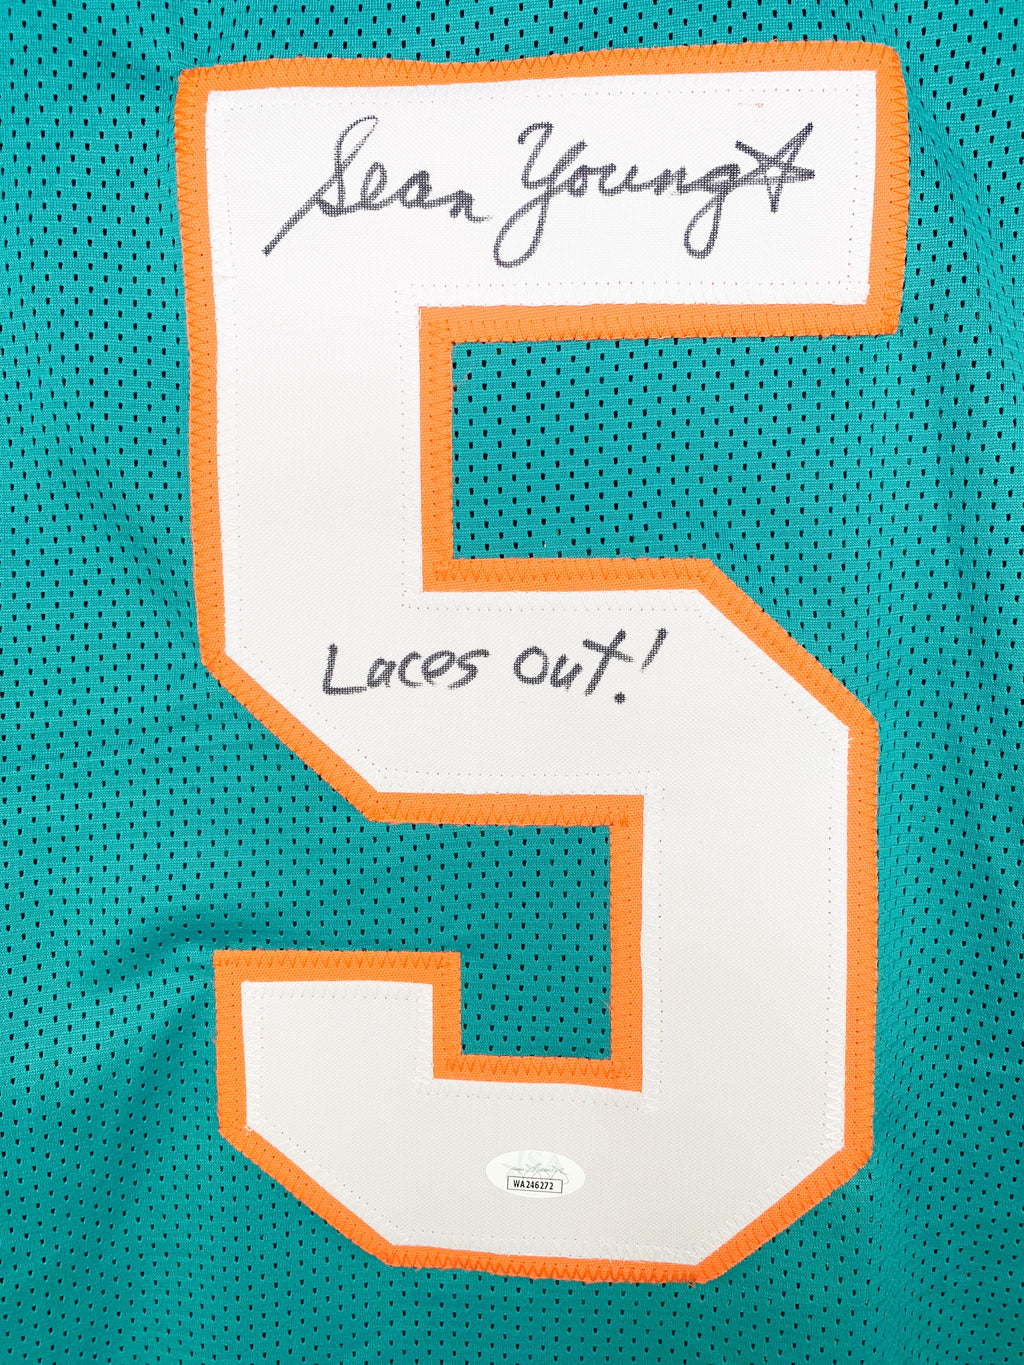 SEAN YOUNG "RAY FINKLE" SIGNED INSCRIBED CUSTOM TEAL AUTOGRAPHED INSCRIBED JERSEY PSA COA ACE VENTURA